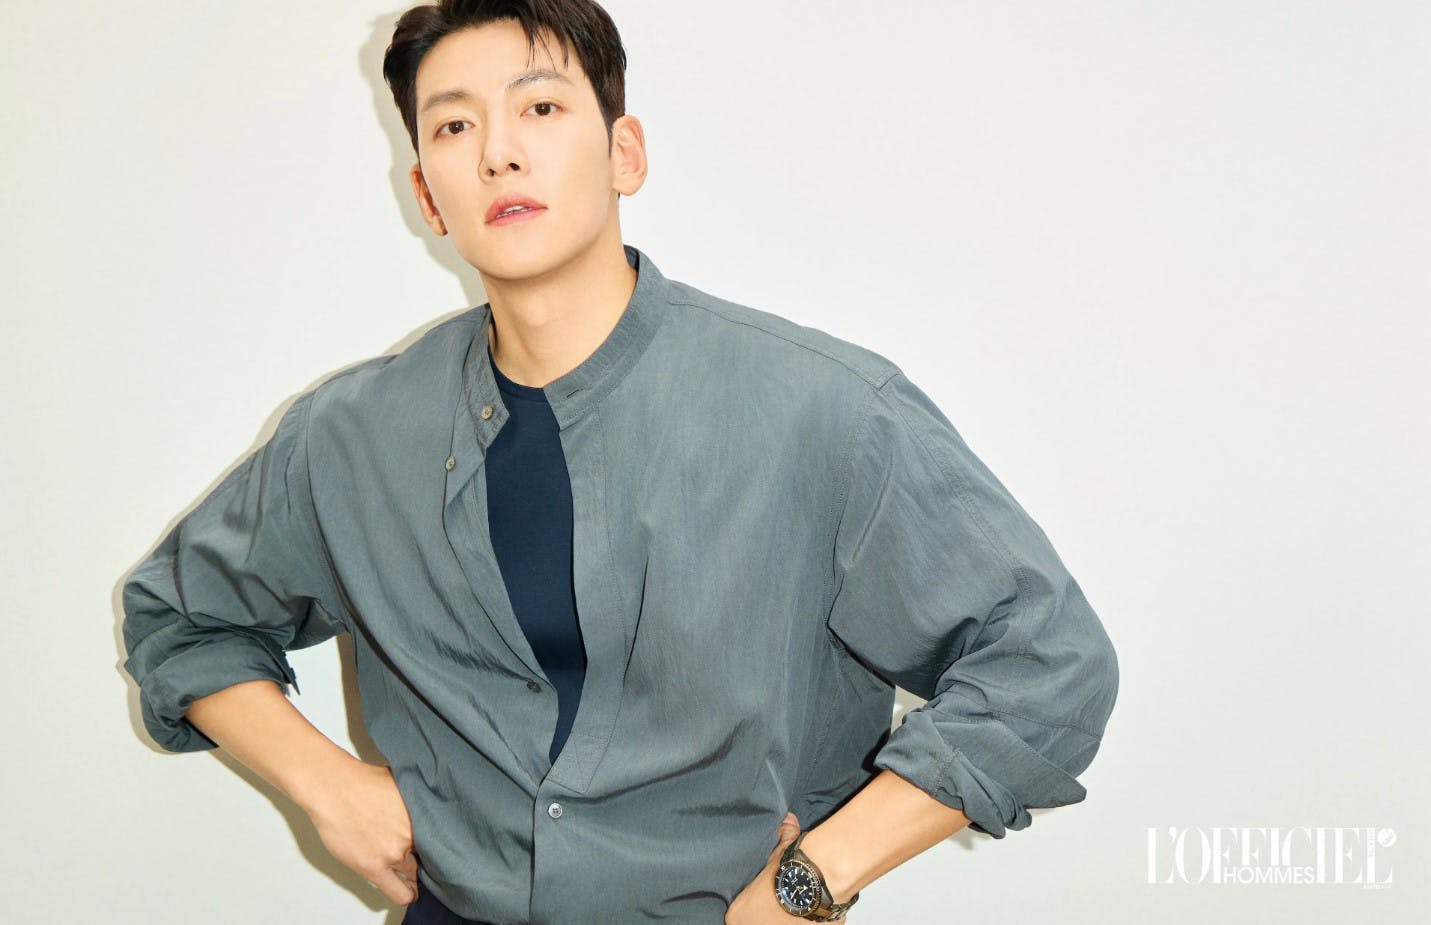 How to meet Ji Chang-wook in Pavilion KL for the Rado event